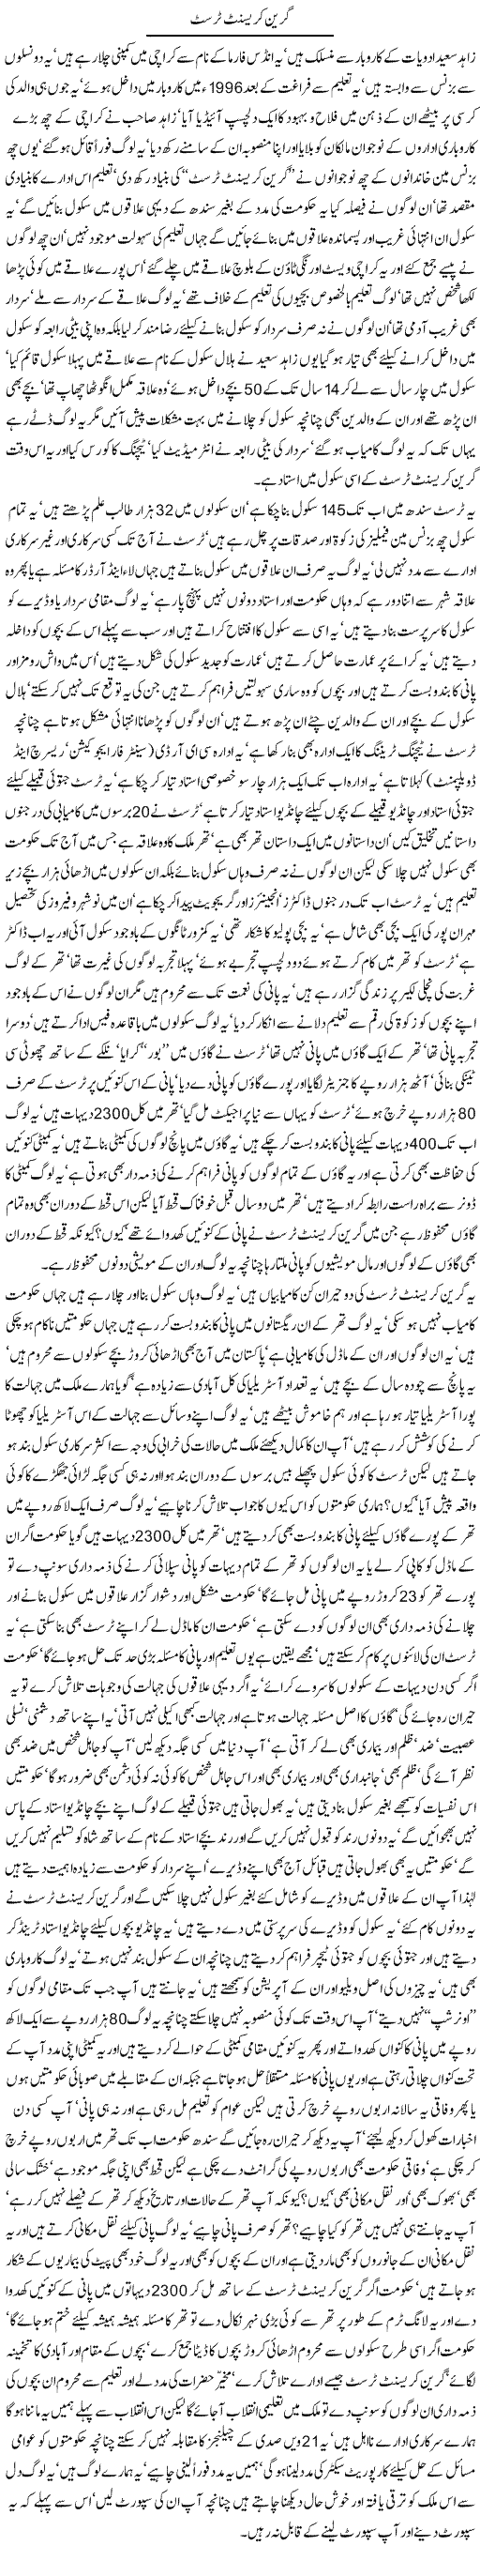 Green Crescent Trust By Javed Chaudhry